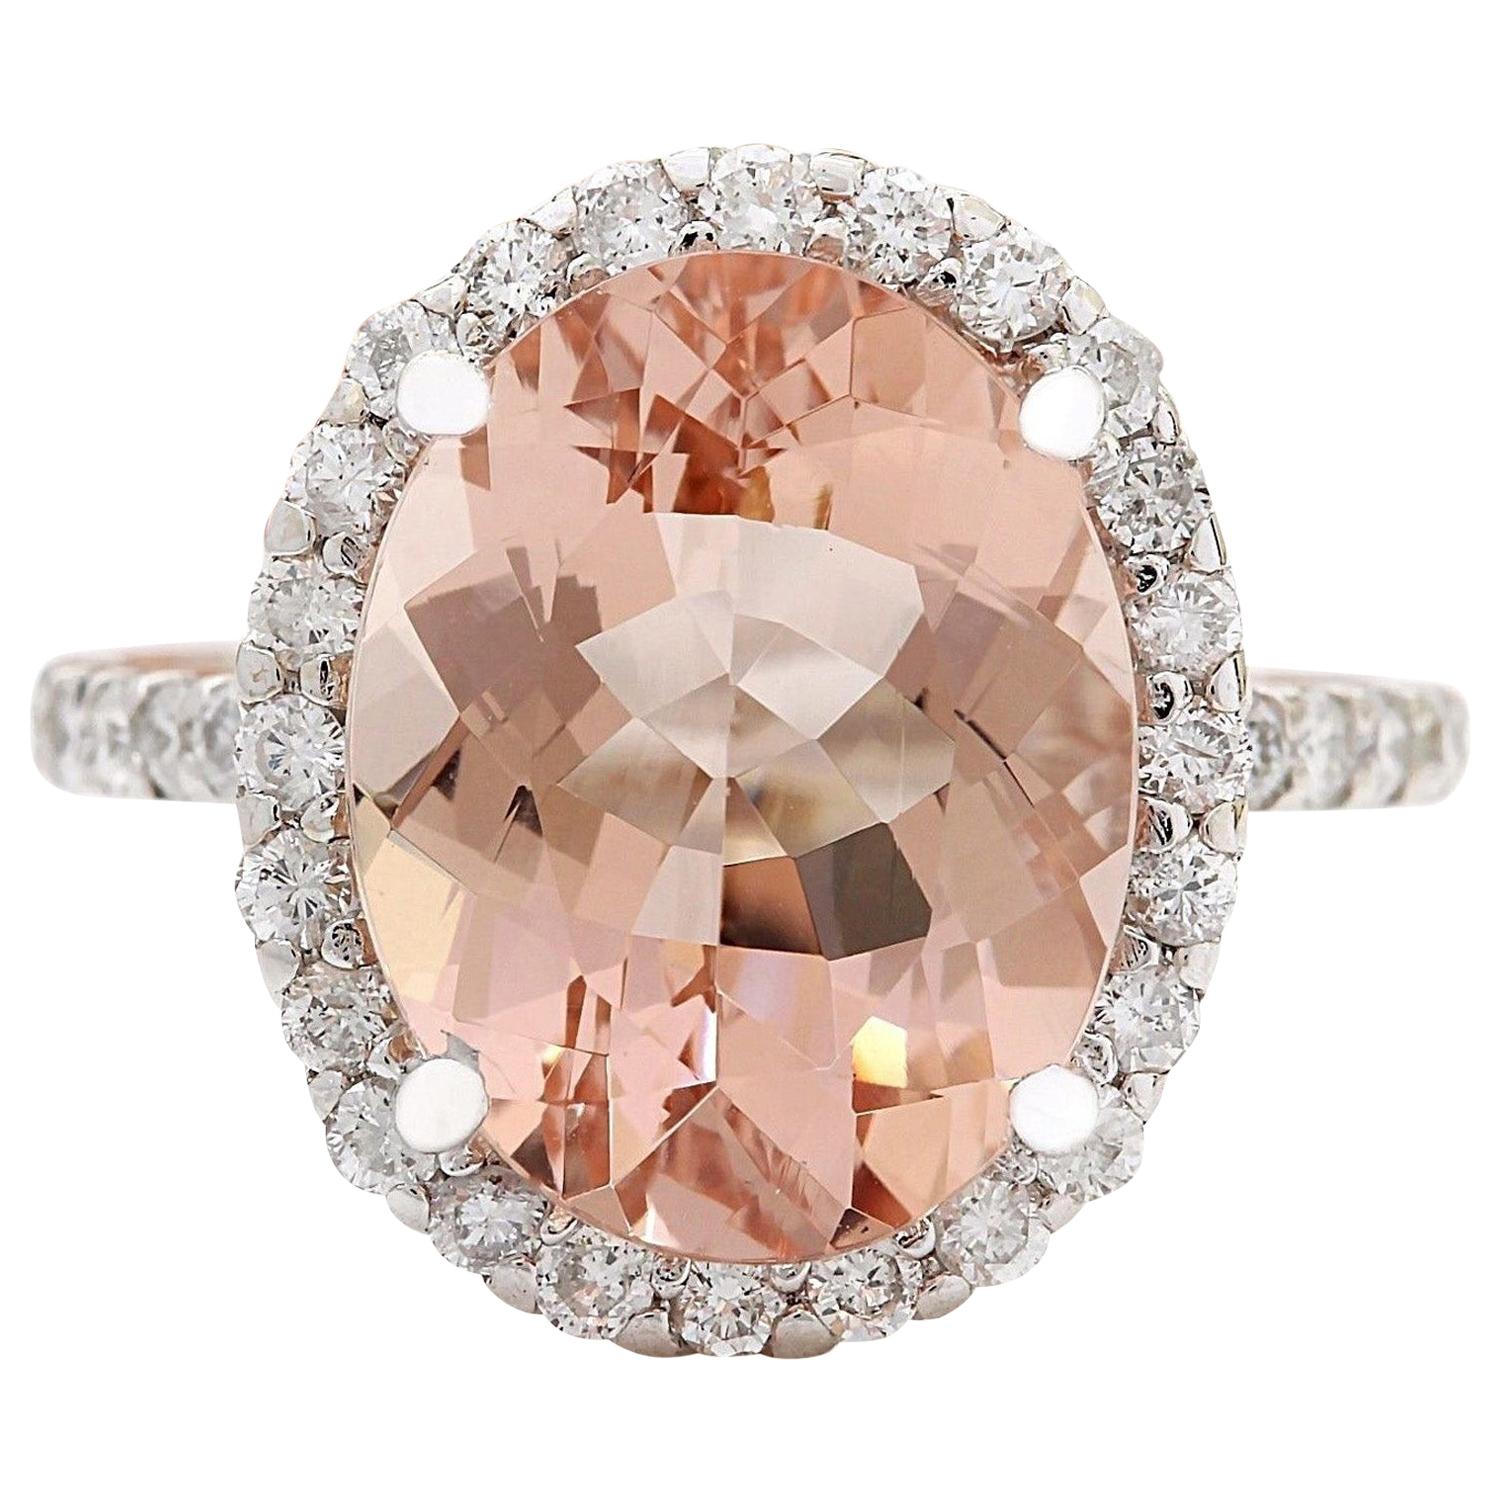 Exquisite Natural Morganite Diamond Ring In 14 Karat Solid White Gold  For Sale